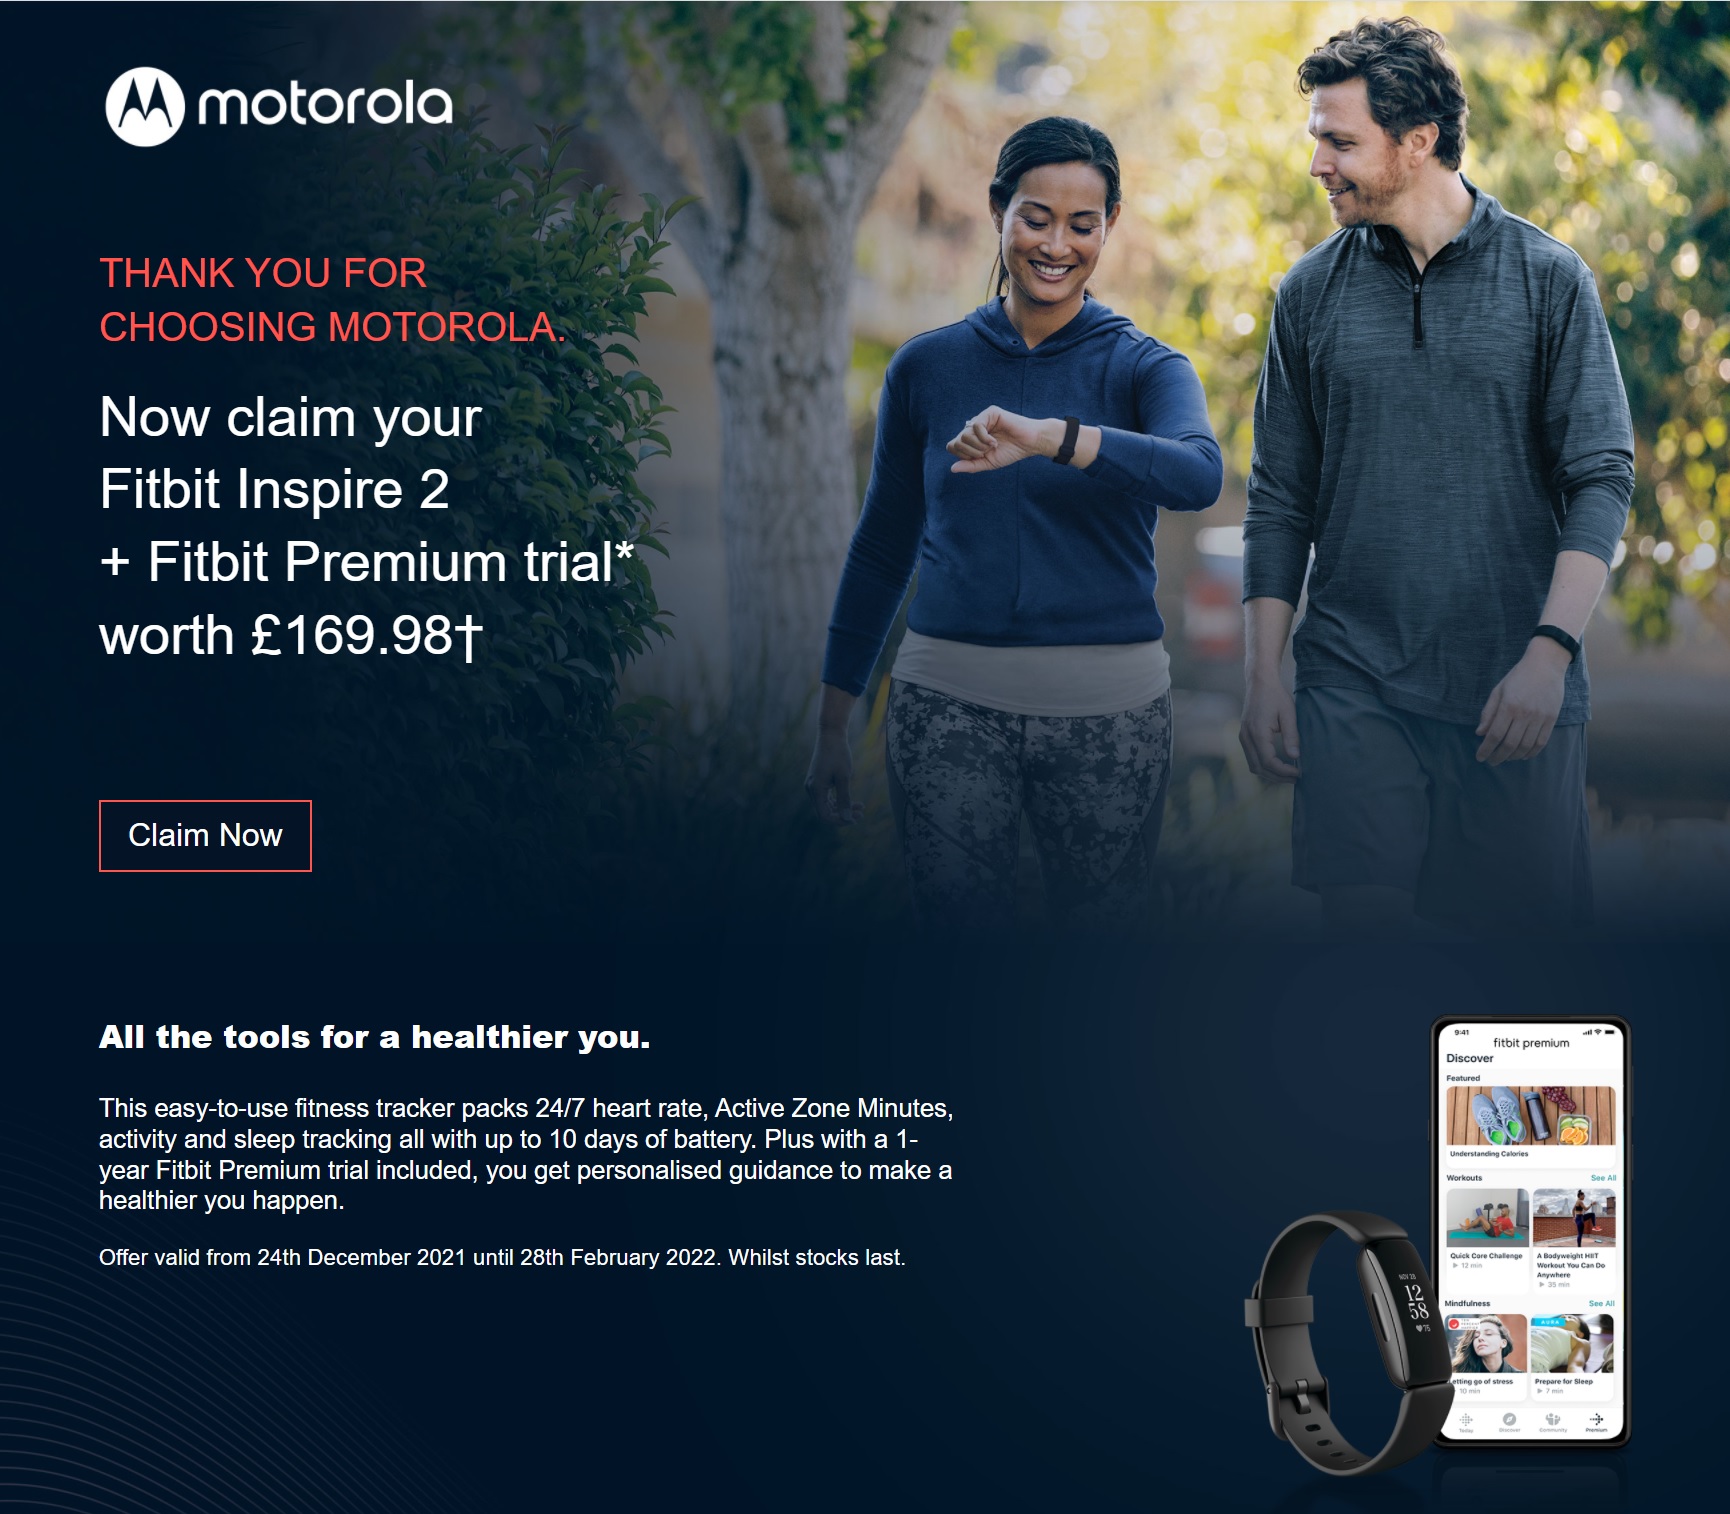 Free Fitbit Inspire 2 and 12 months Free Fitbit Premium with Motorola Moto Edge 20 Deals